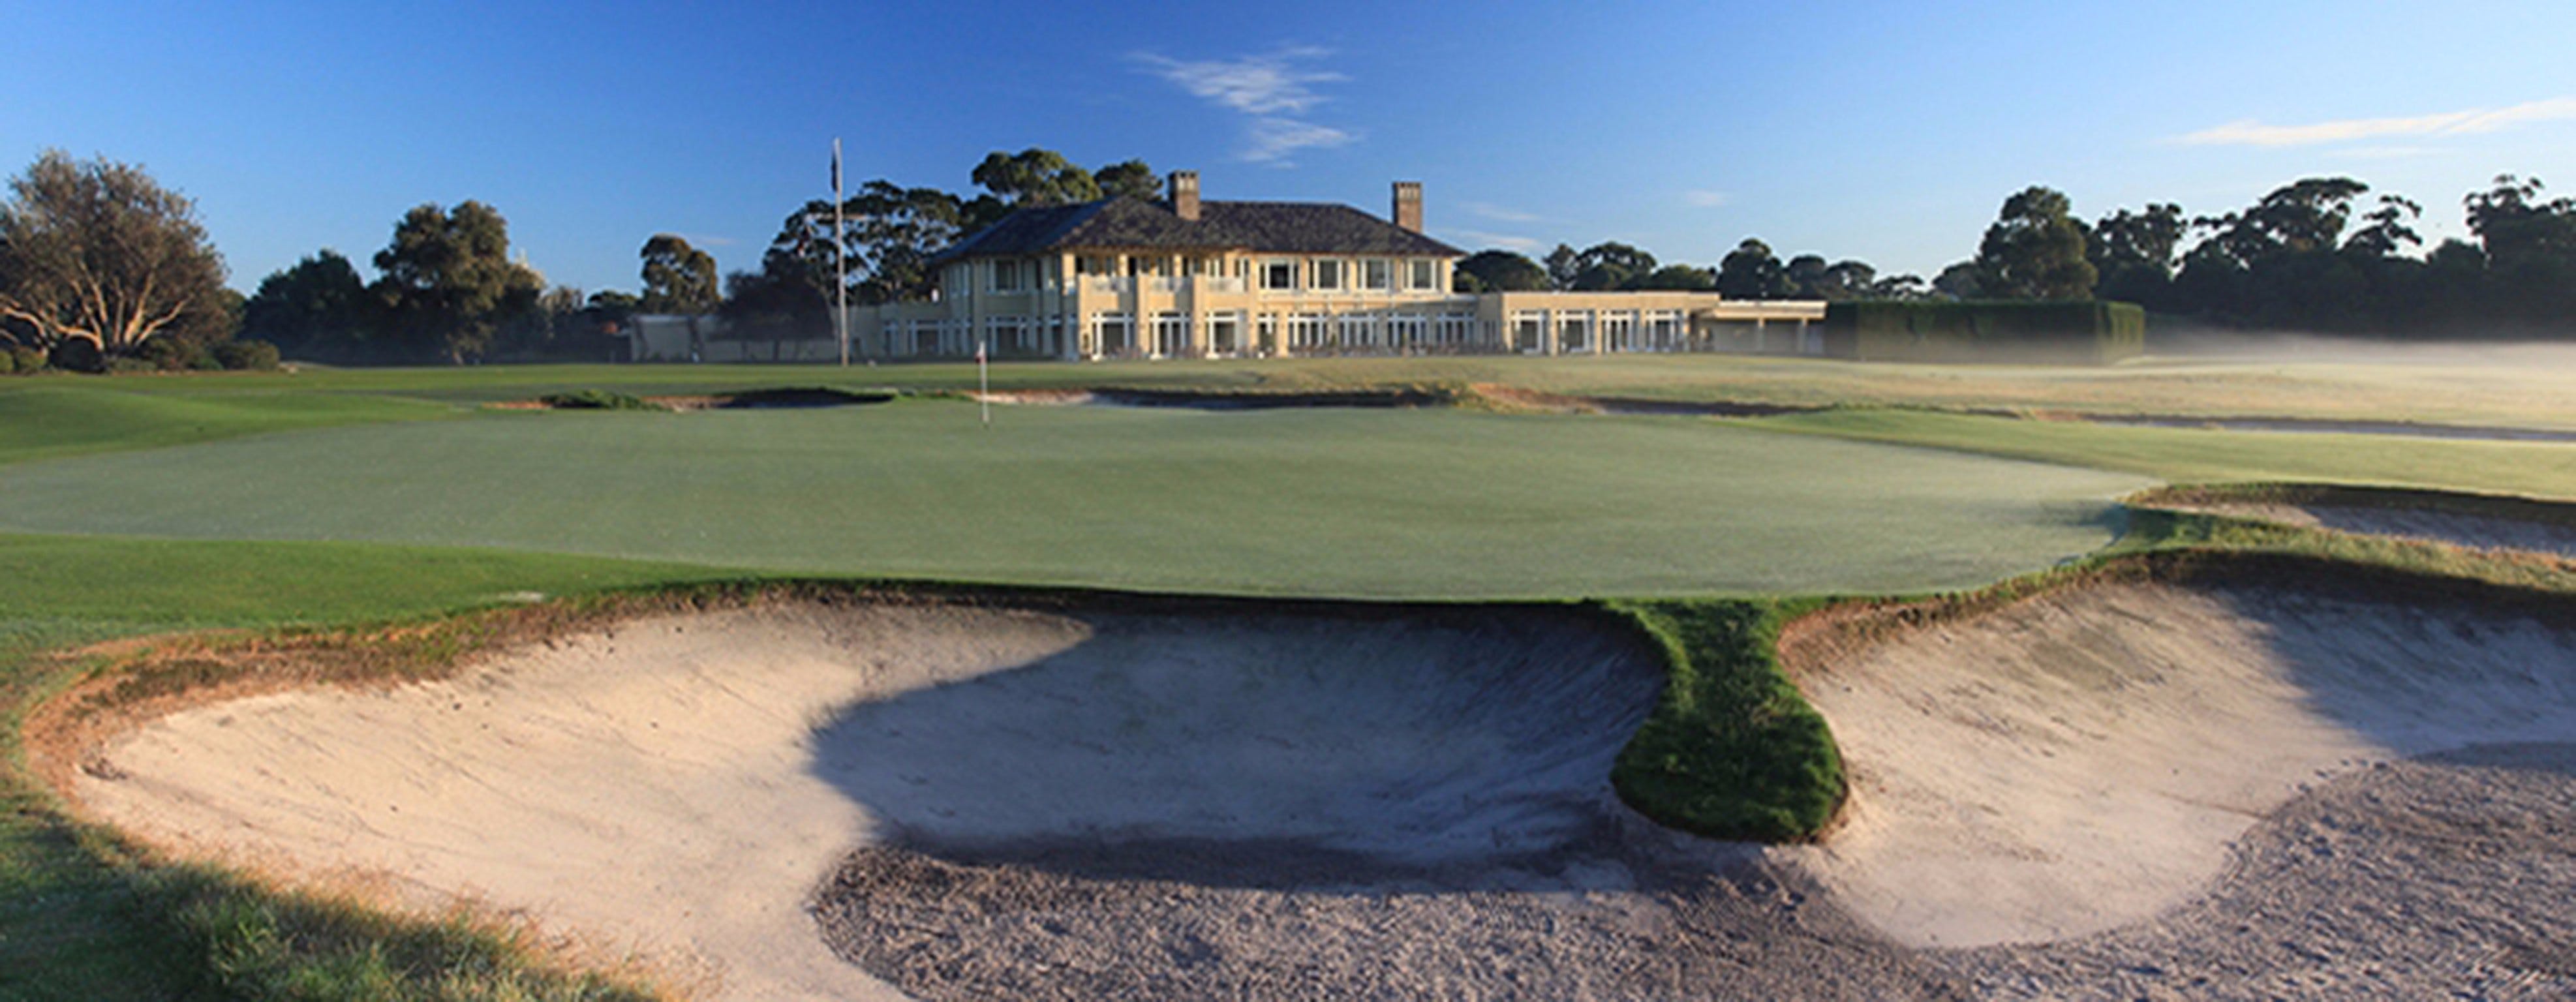 The Royal Melbourne Golf Club - Attractions Melbourne